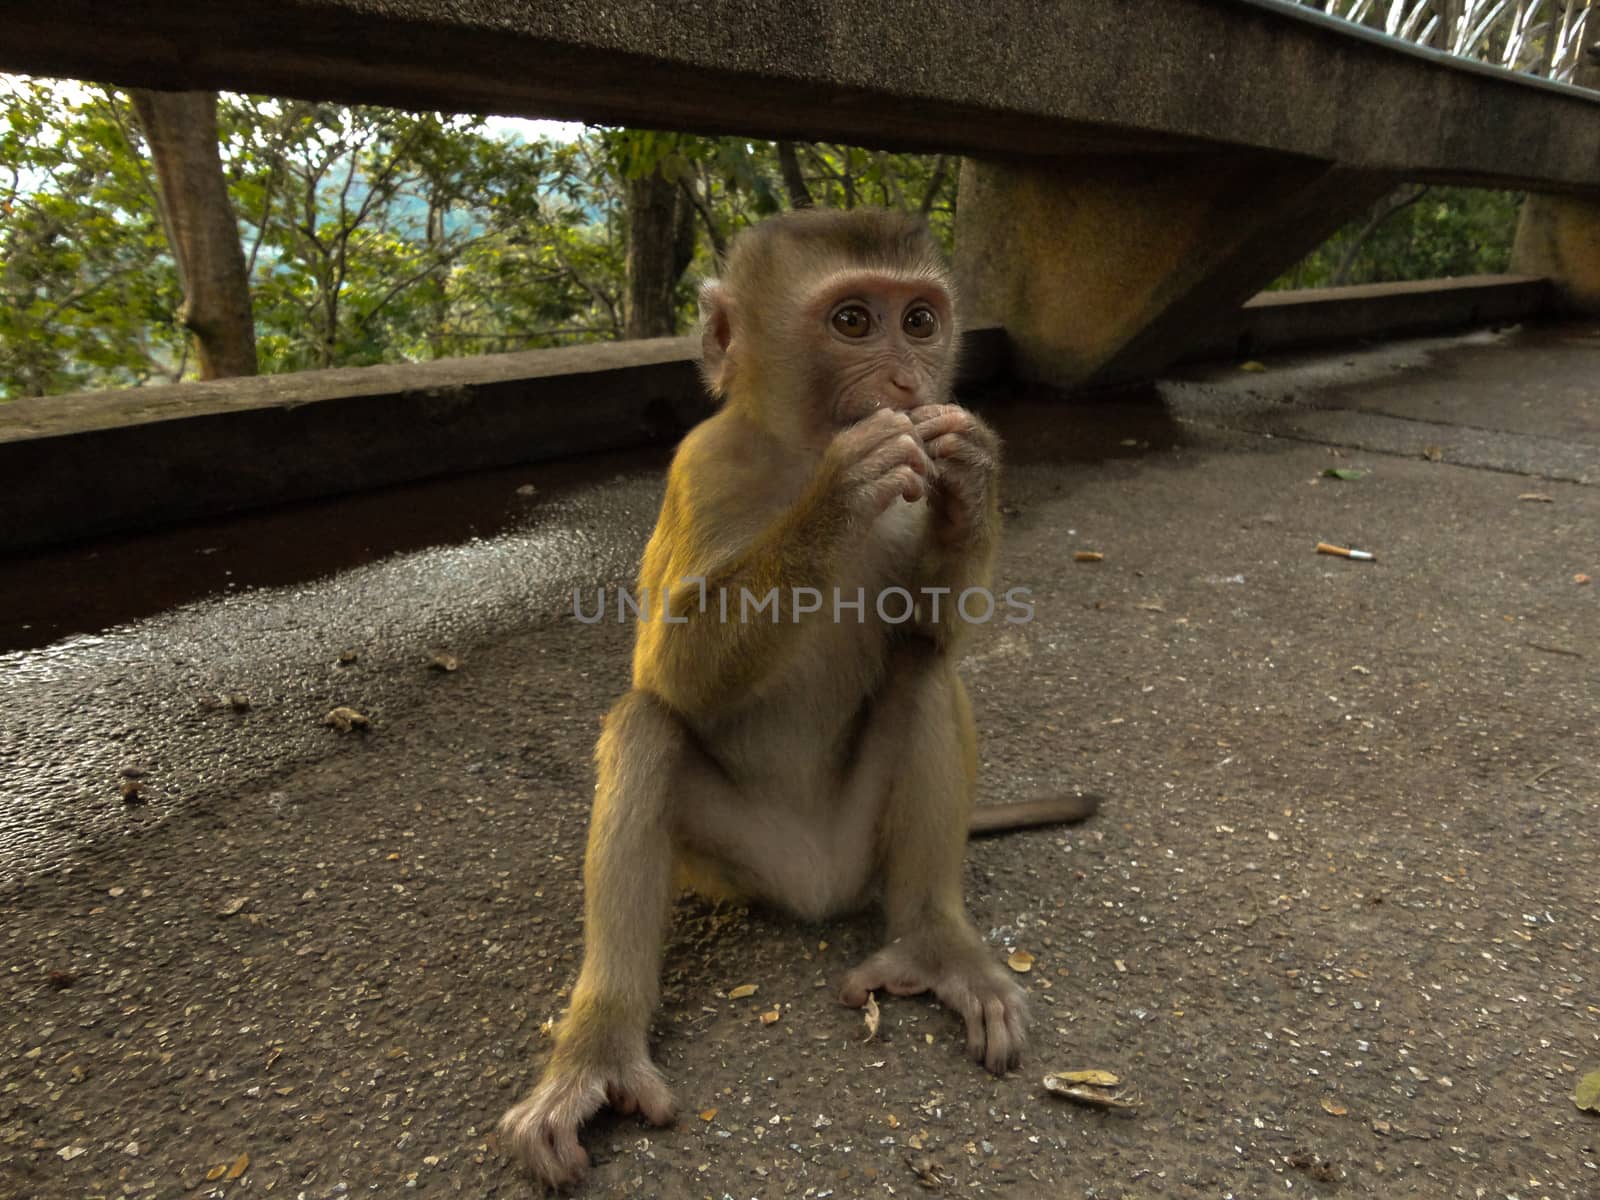 A lonely male long-tail mountain monkey sitting on gravel platform. macaca monkey in Thailand